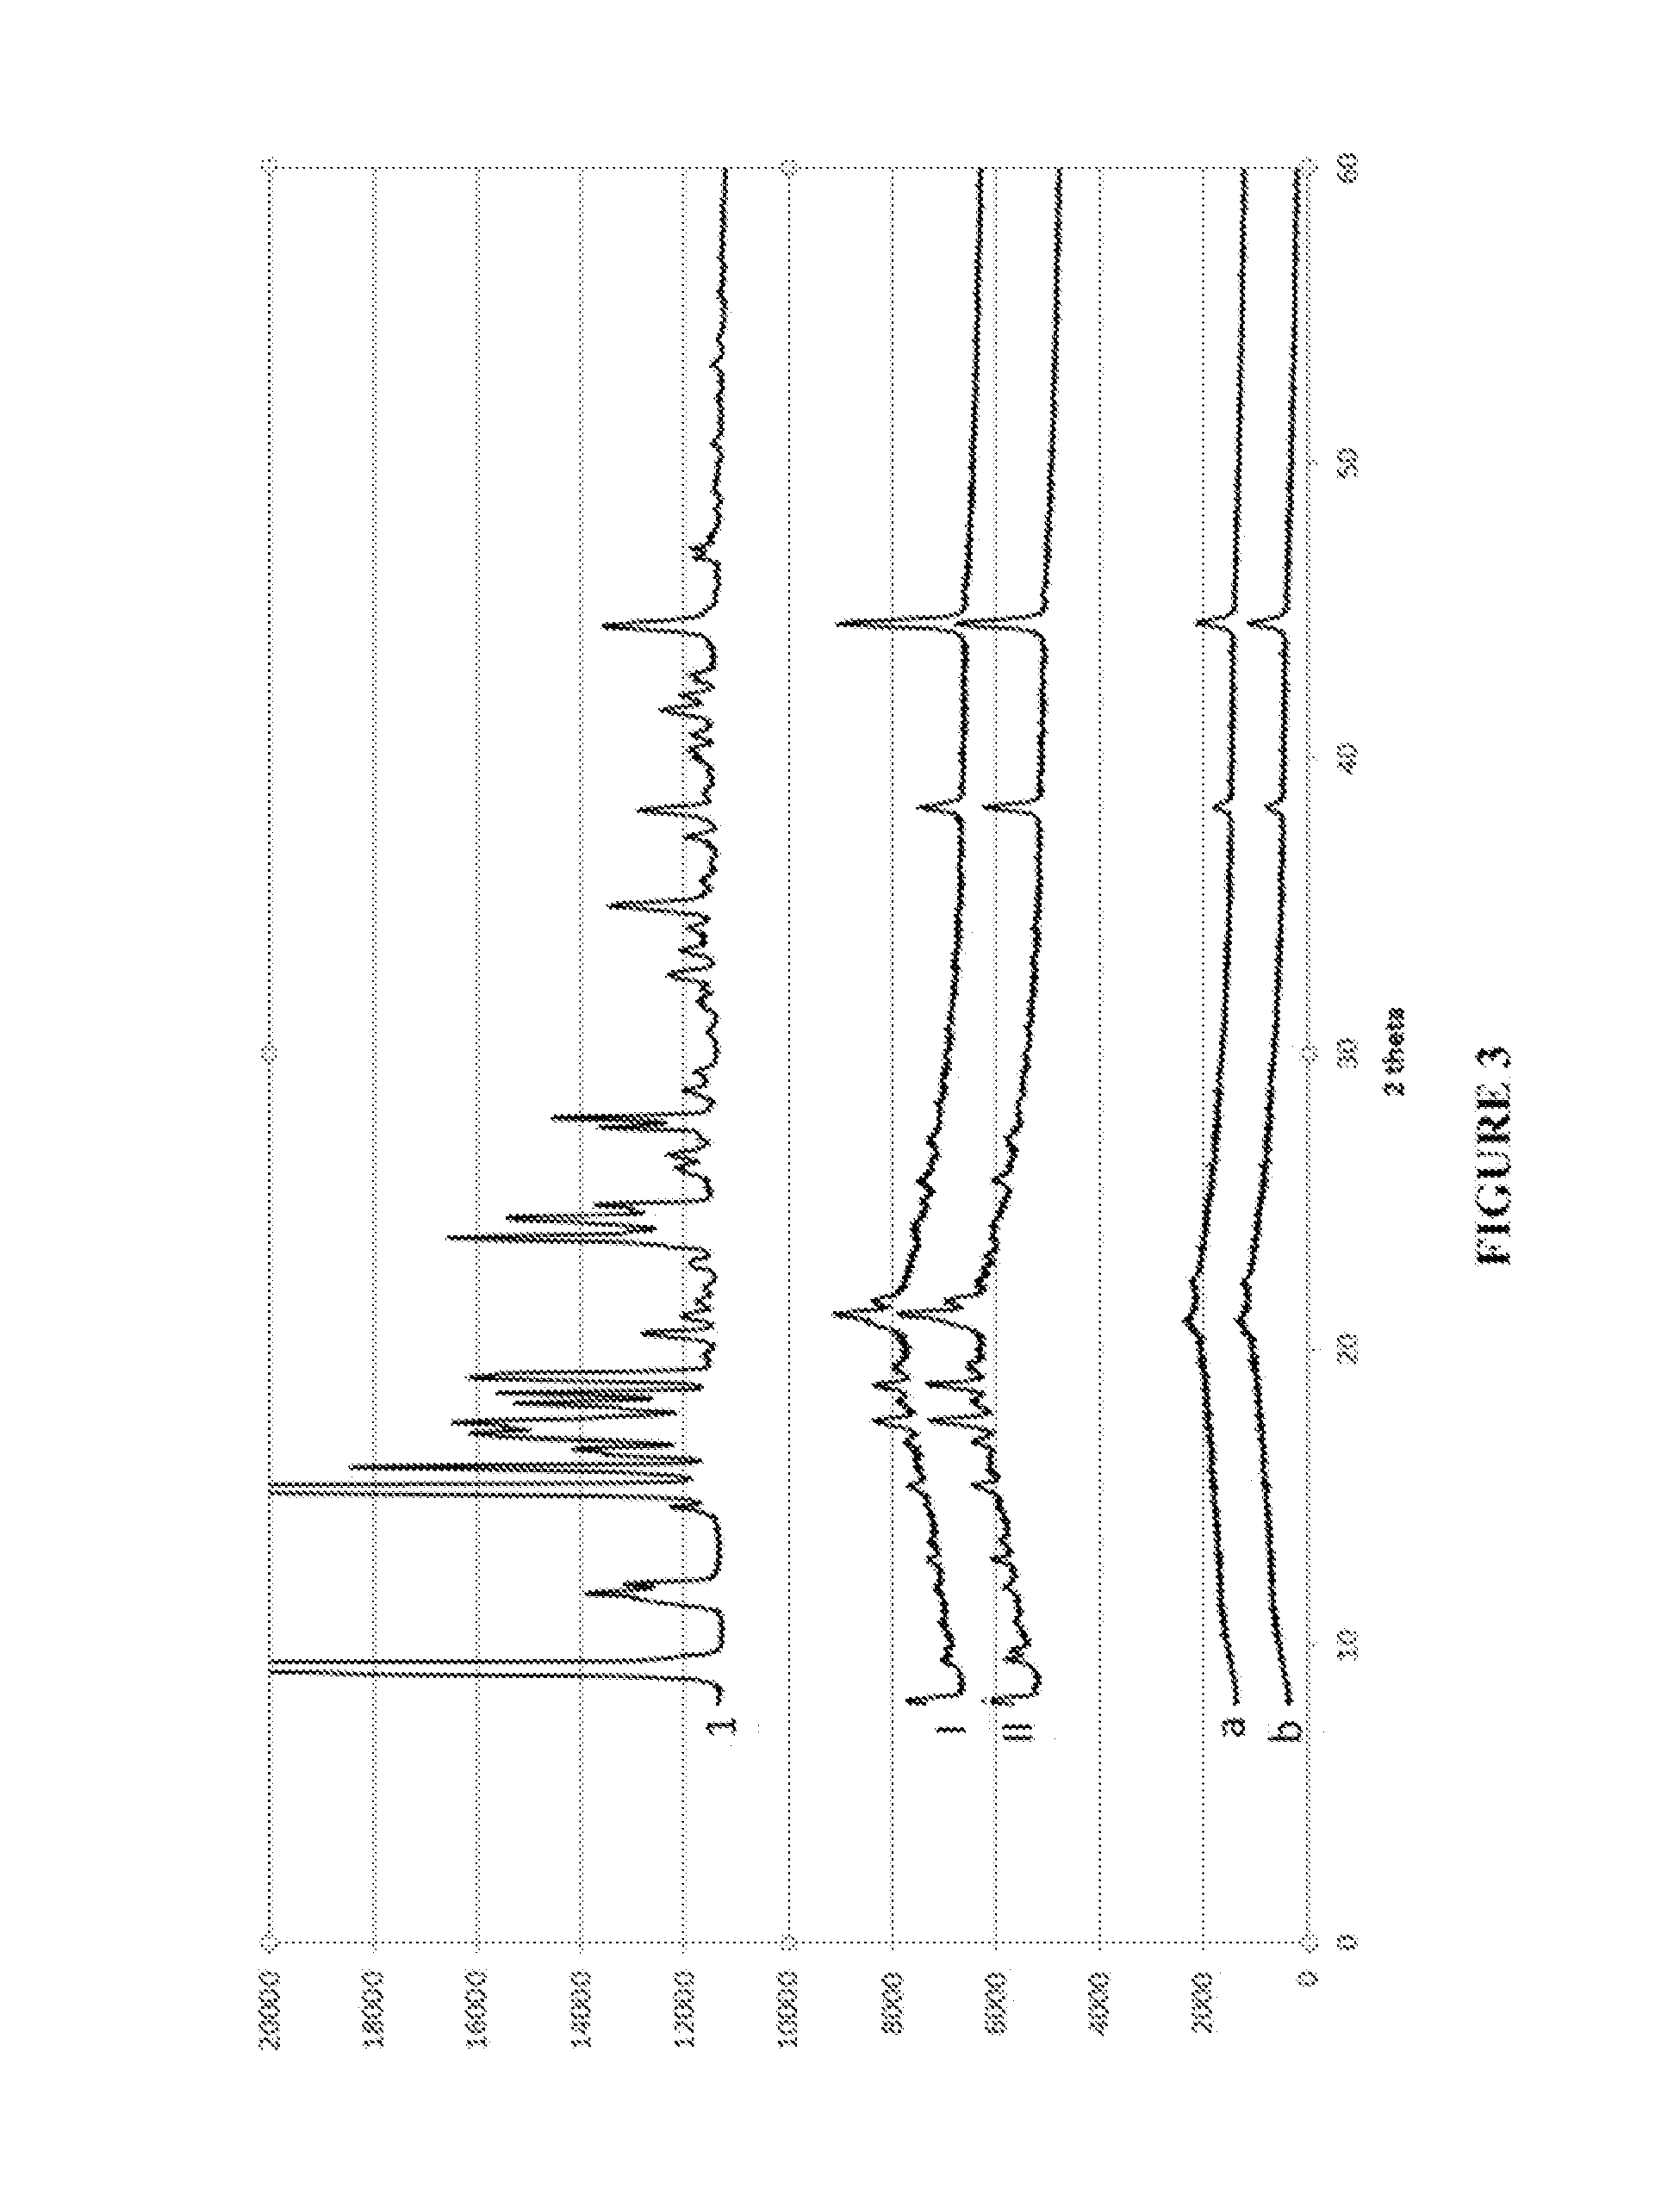 Solid dispersion of a selective modulator of the progesterone receptor